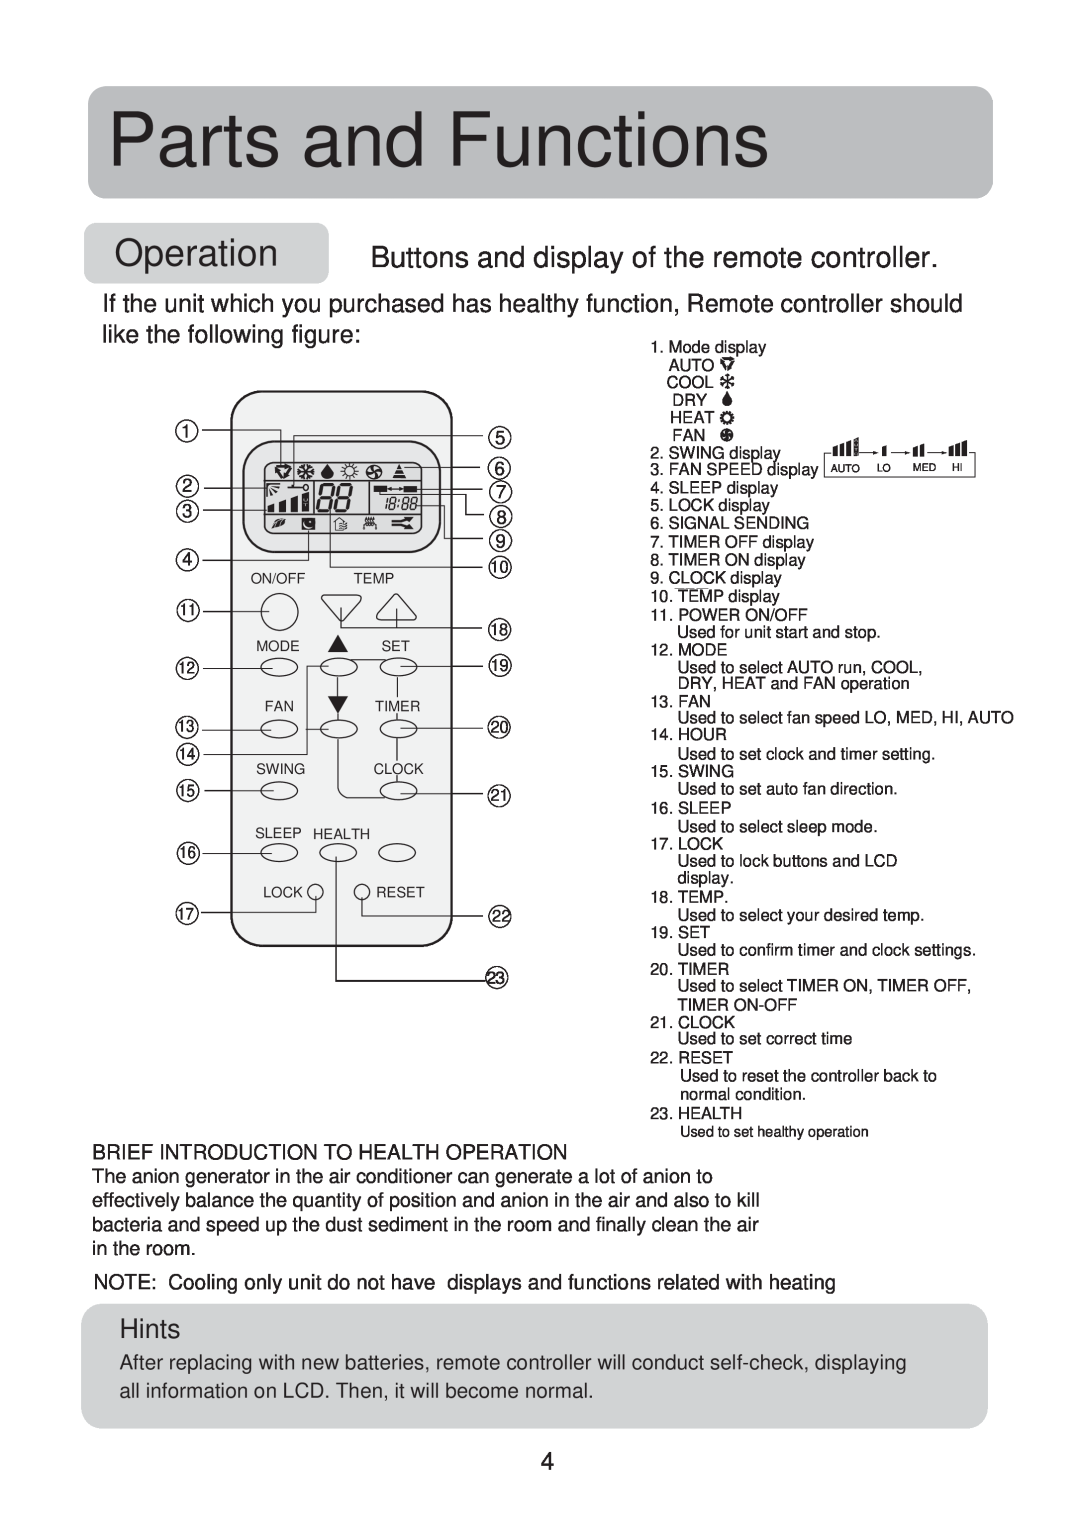 Haier No. 0010551809 operation manual Parts and Functions, Hints, like the following figure 